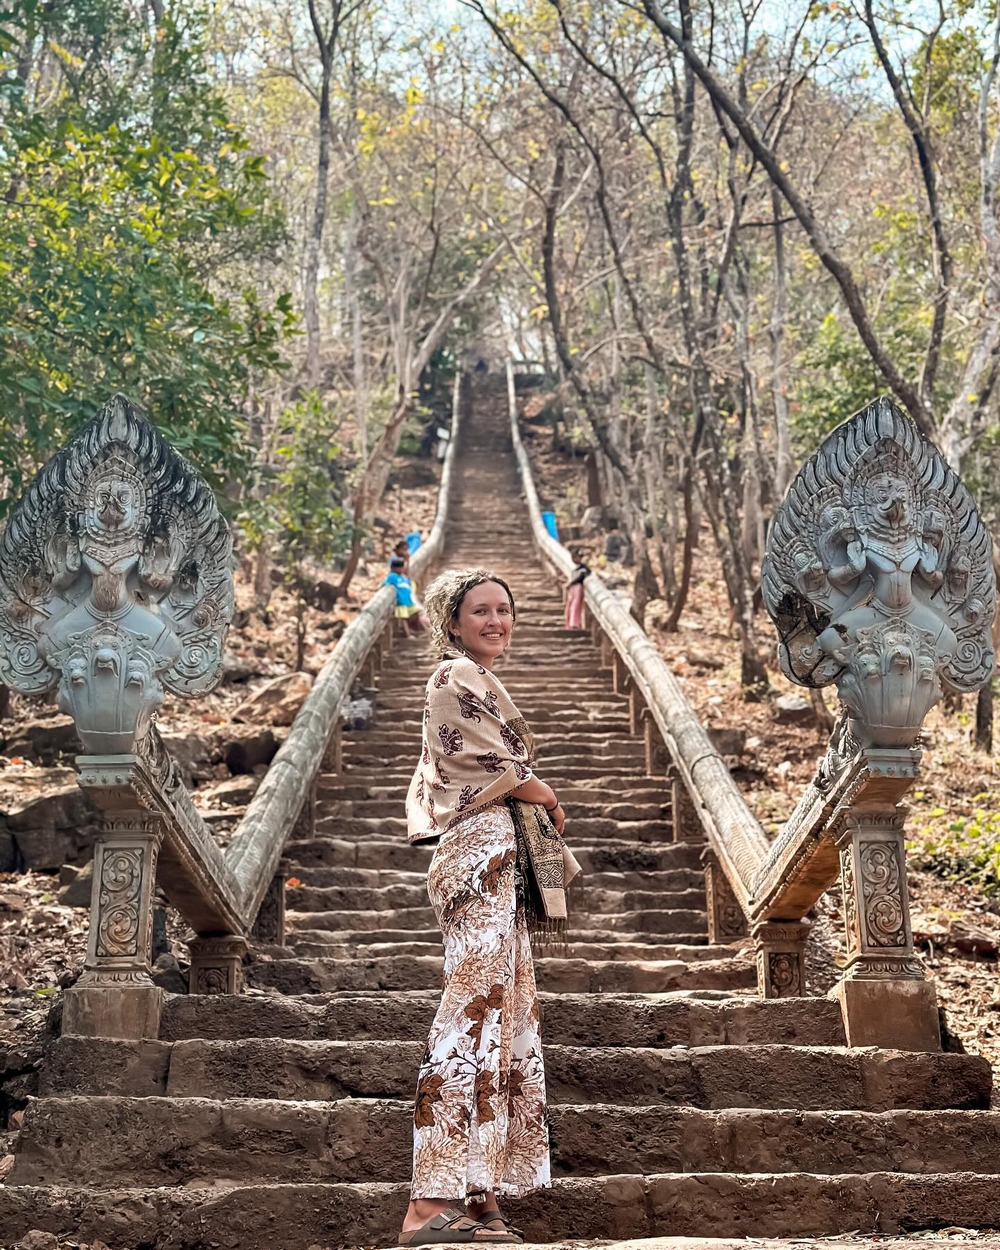 Climbing the 350+ steps of Wat Banan hill will reward view with an amazing view over Battambang, as well as the old Angkorian temple at the top of the hill.